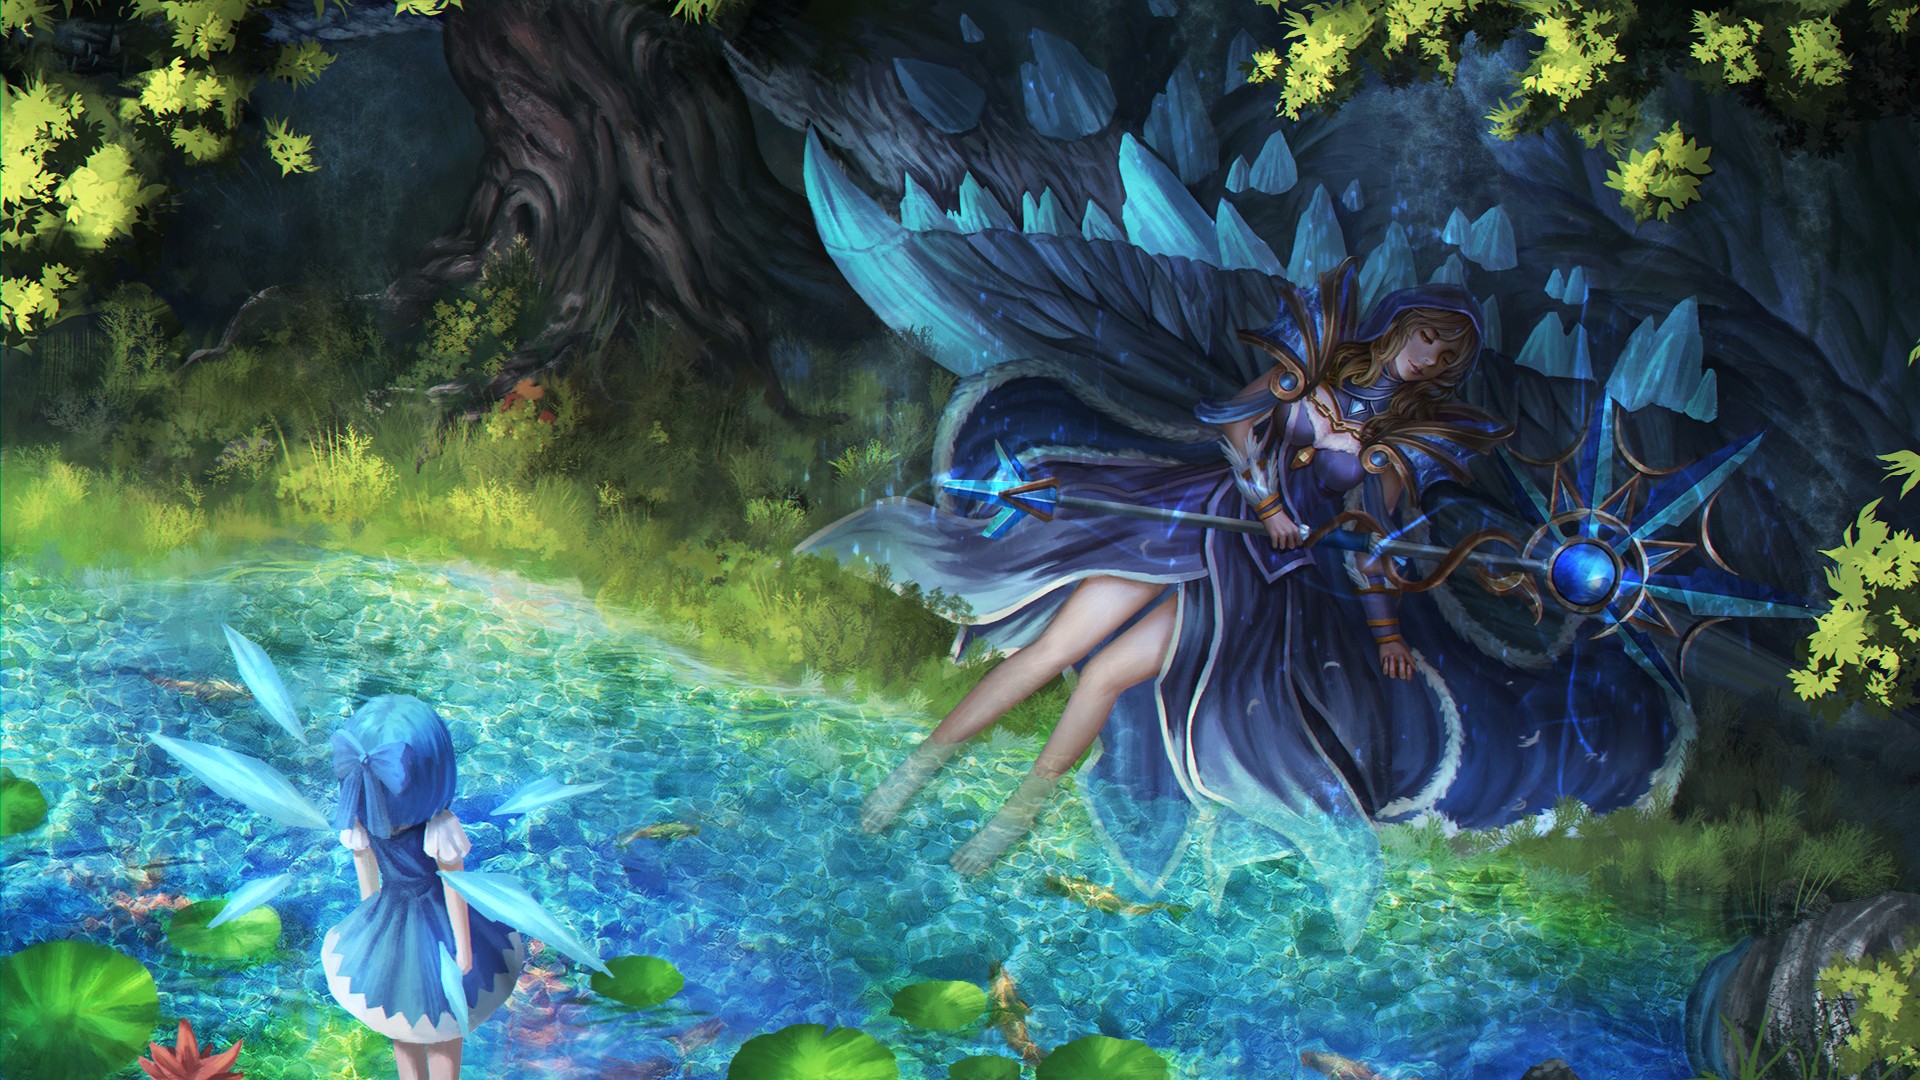 Anime 1920x1080 animals cyan hair armor barefoot hair bows Cirno Dota 2 dress fish forest grass hoods leaves long hair staff trees water Rylai crossover League of Legends